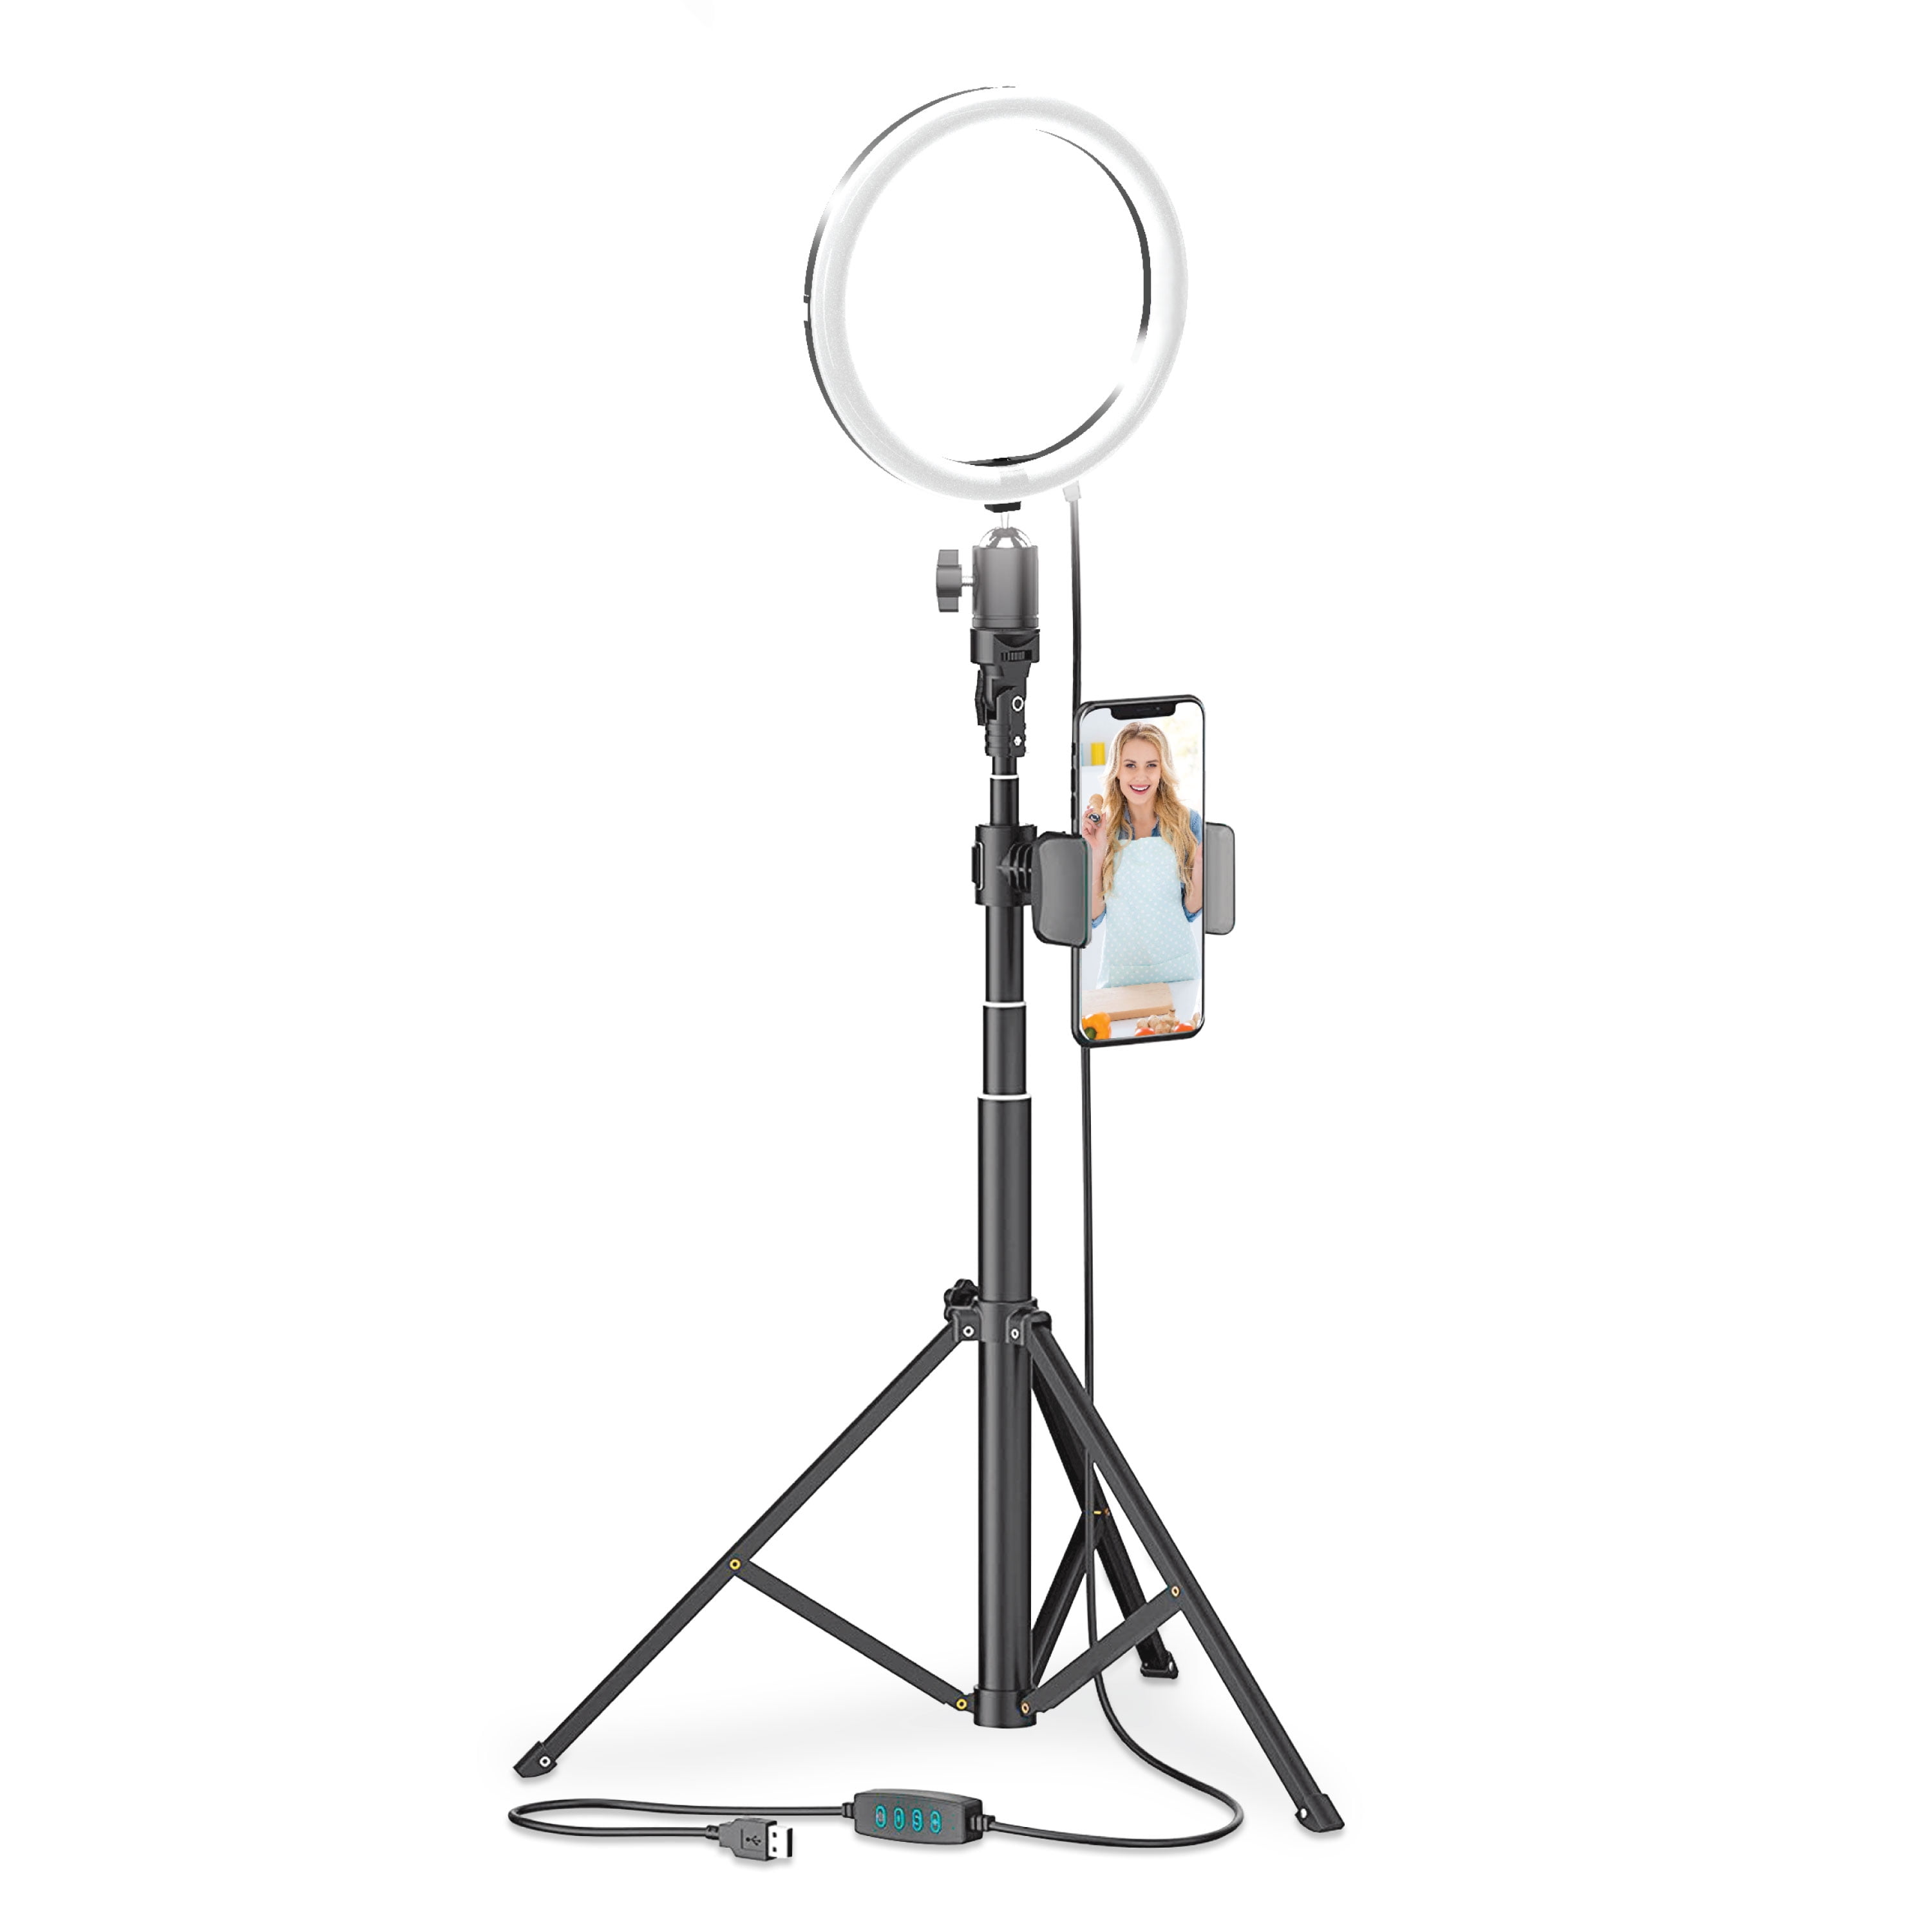 8" Bower Selfie Ring Light Studio Kit w/ 17.5" to 51" Extendable Tripod, Remote & Phone Holder $7.50 + Free S&H w/ Walmart+ or $35+